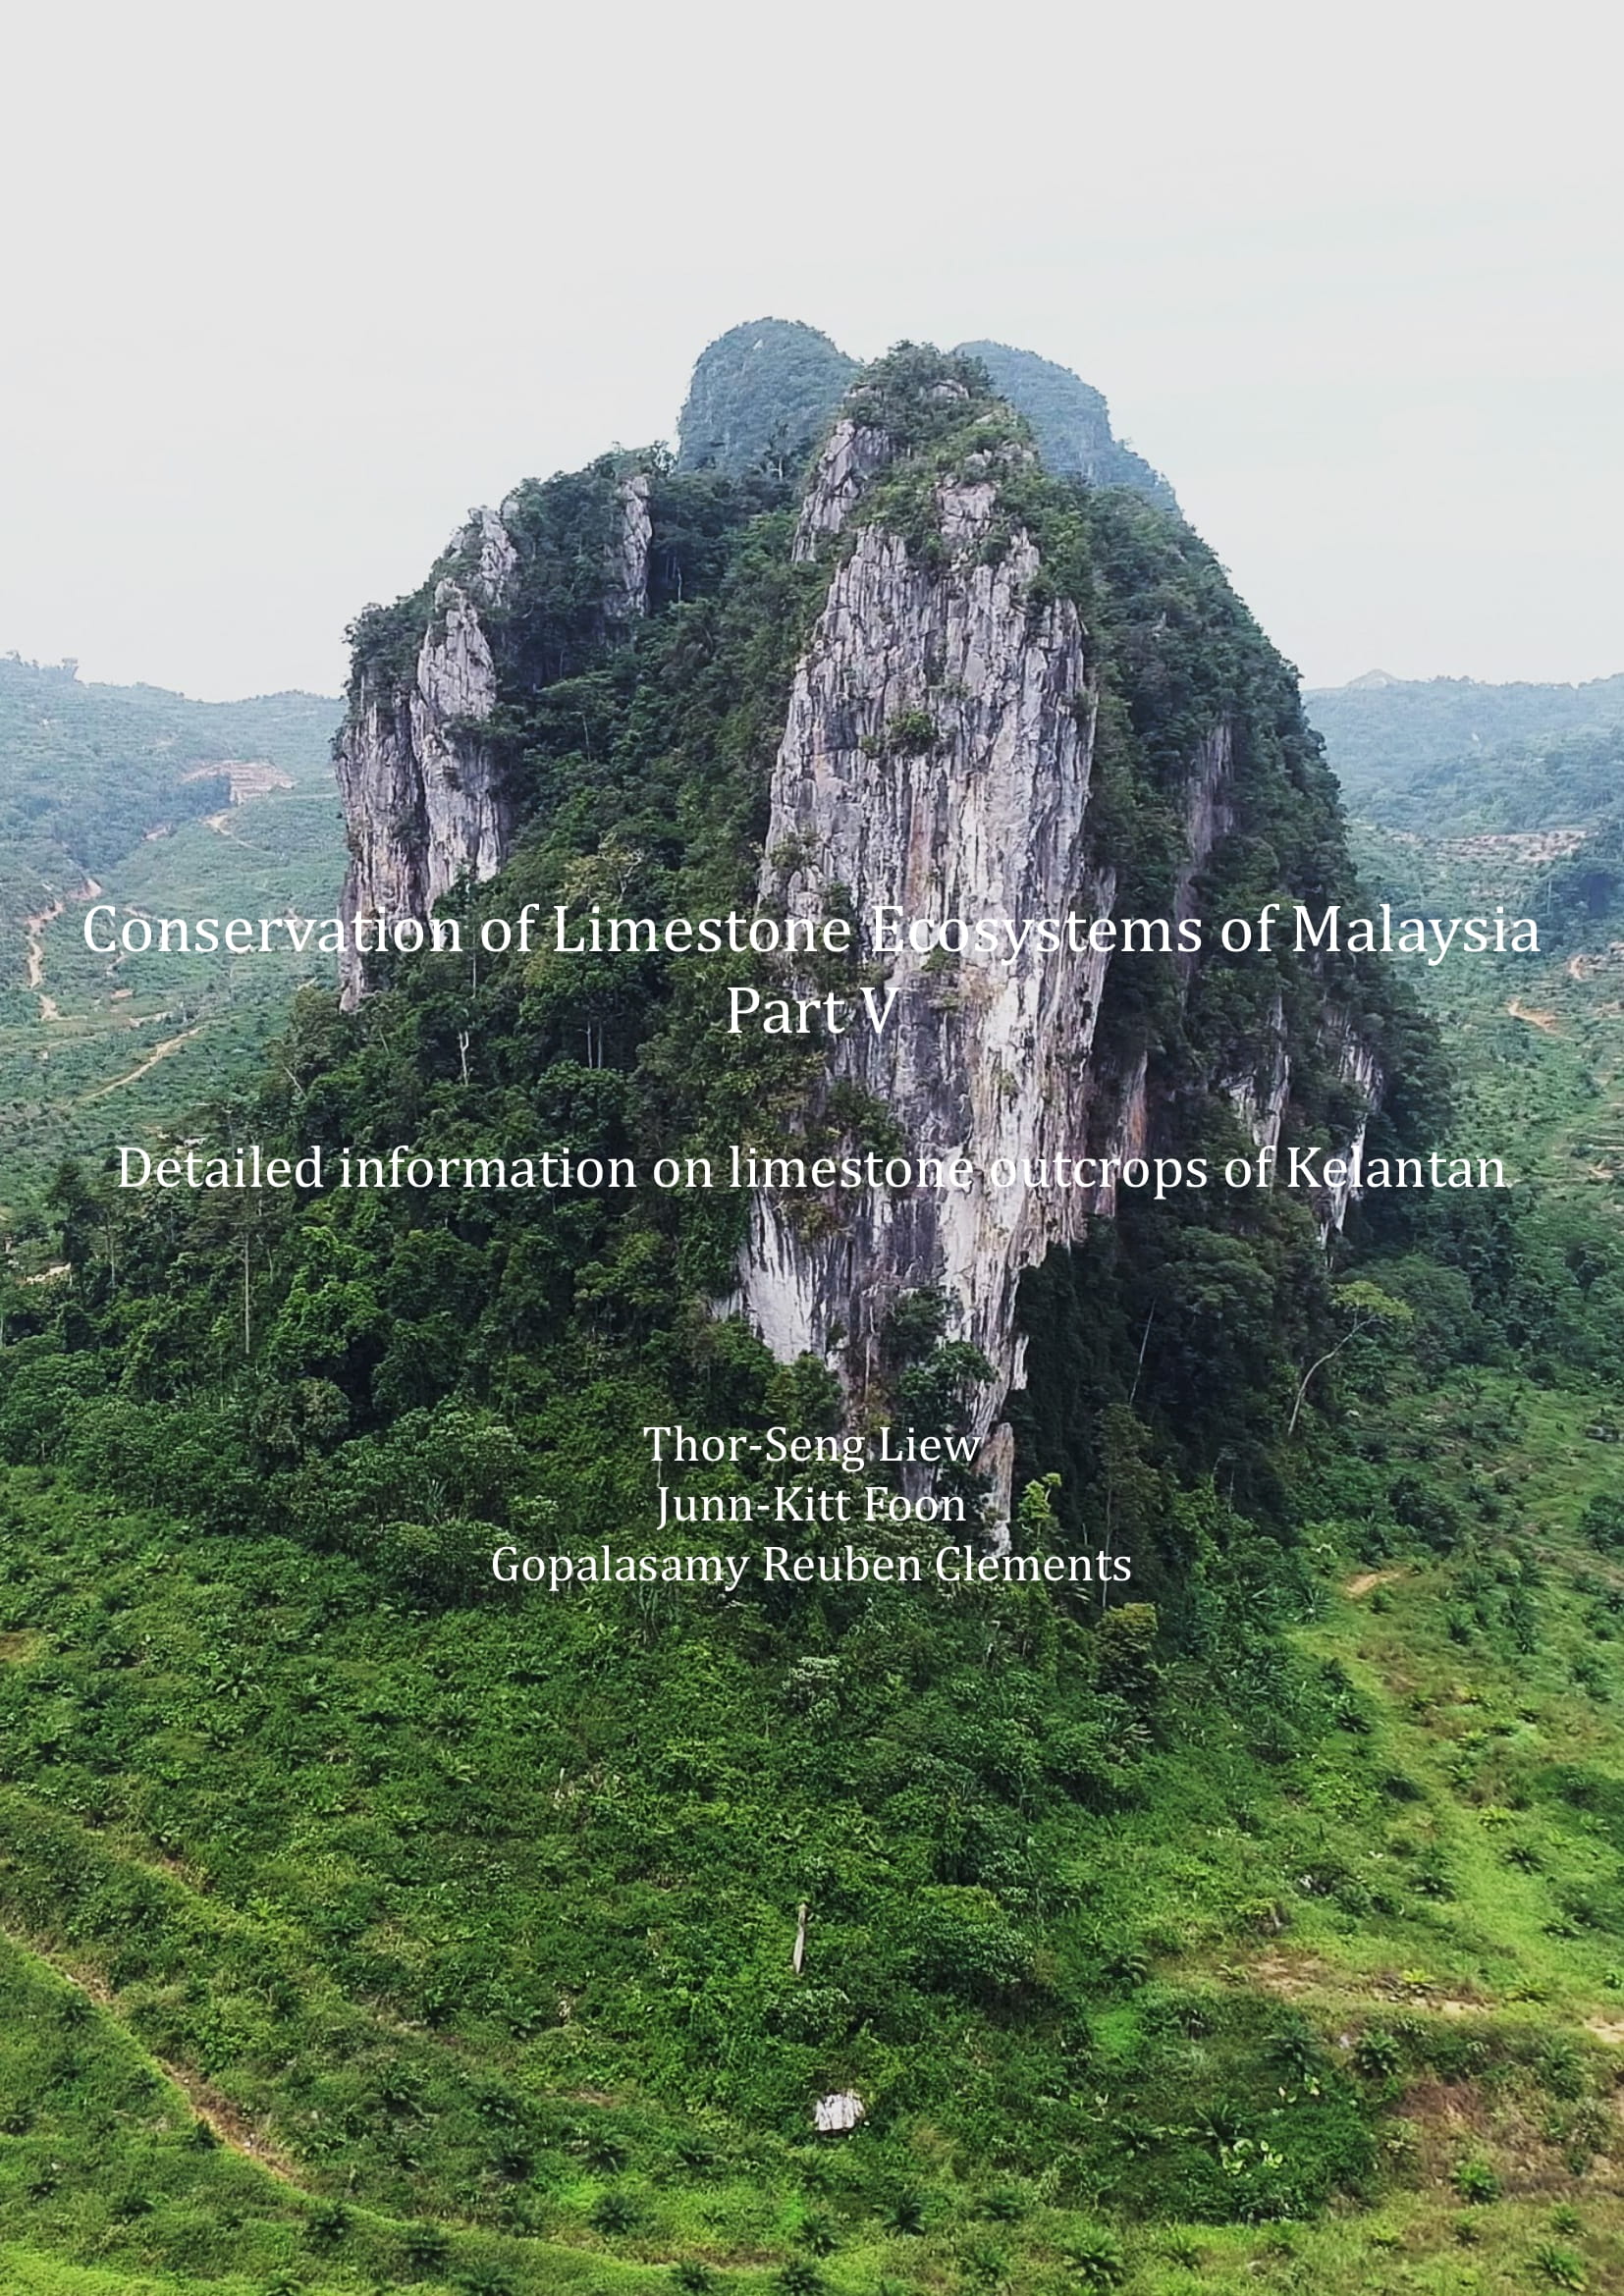 Conservation of Limestone Ecosystems of Malaysia, Part V, Detailed information on limestone outcrops of Kelantan.